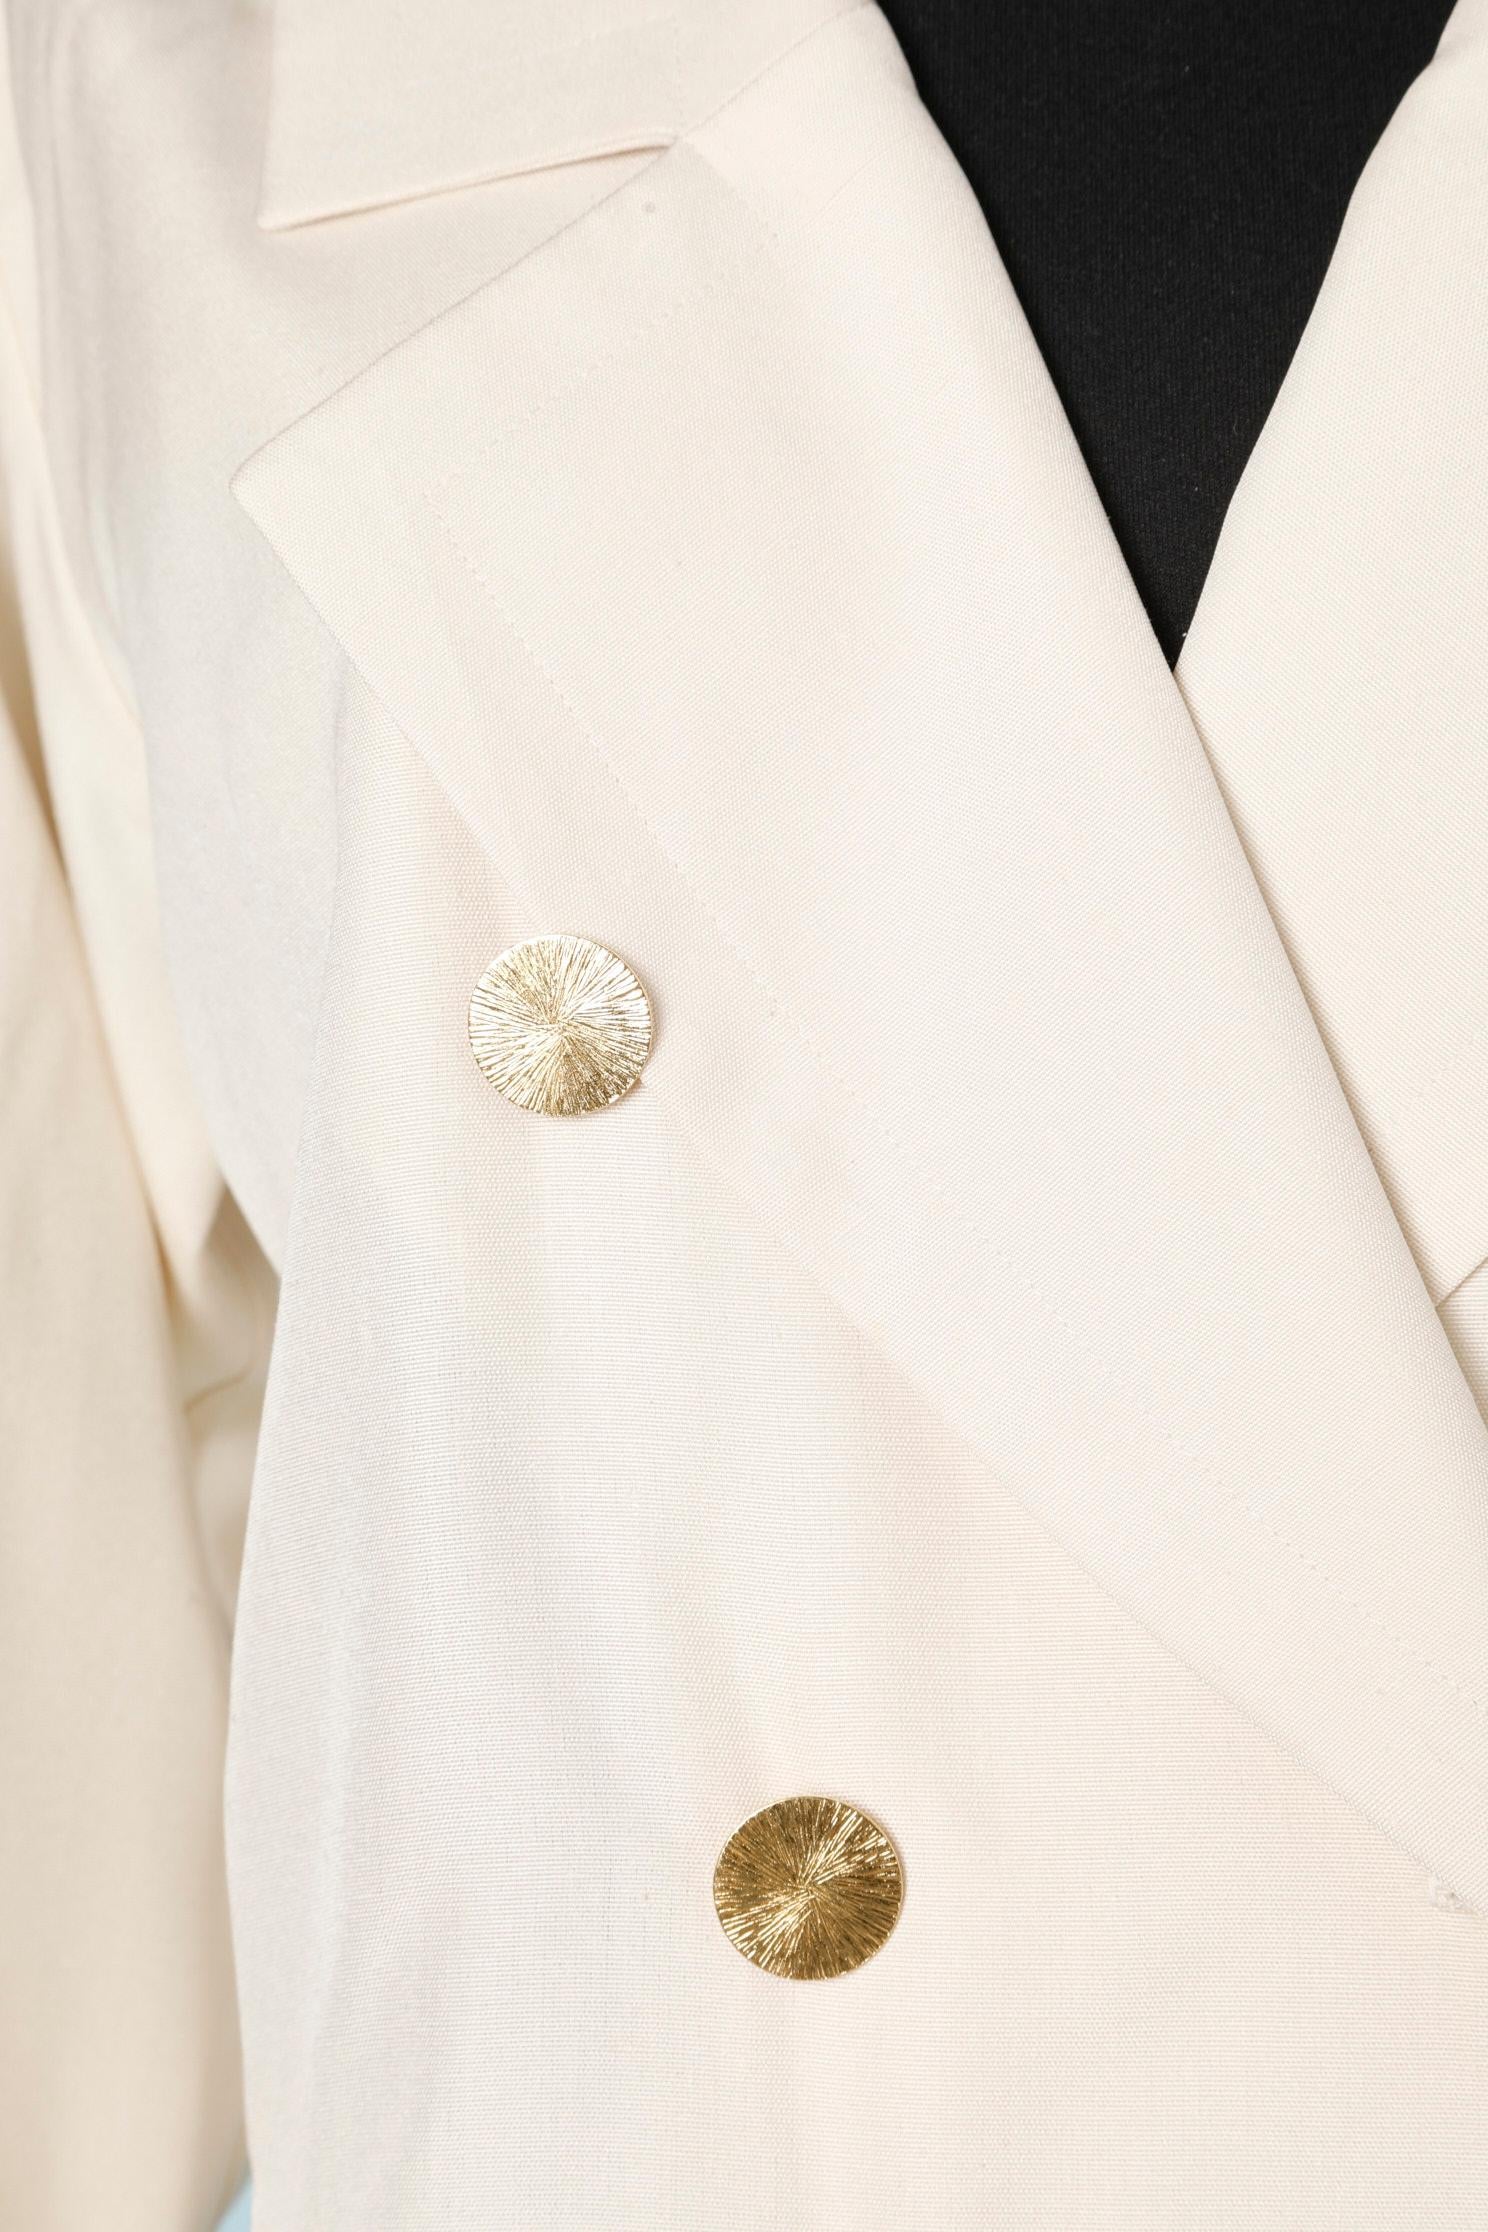 Gold Off-white raw silk skirt-suit  with gold buttons Yves Saint Laurent Rive Gauche  For Sale